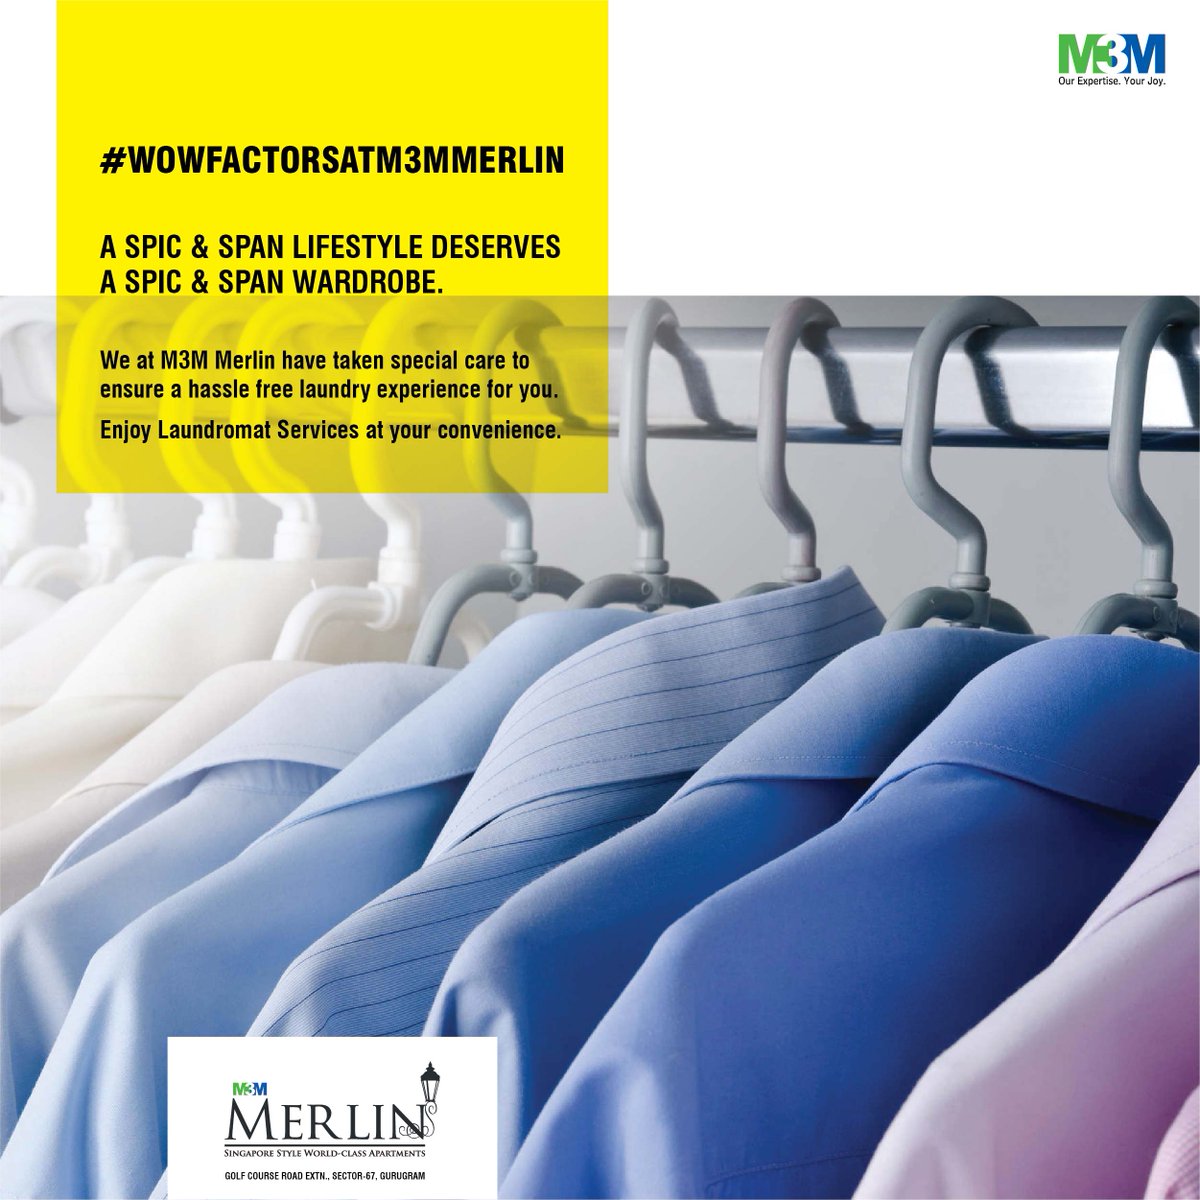 M3M Merlin opens Laundromat Services at Your Convenience